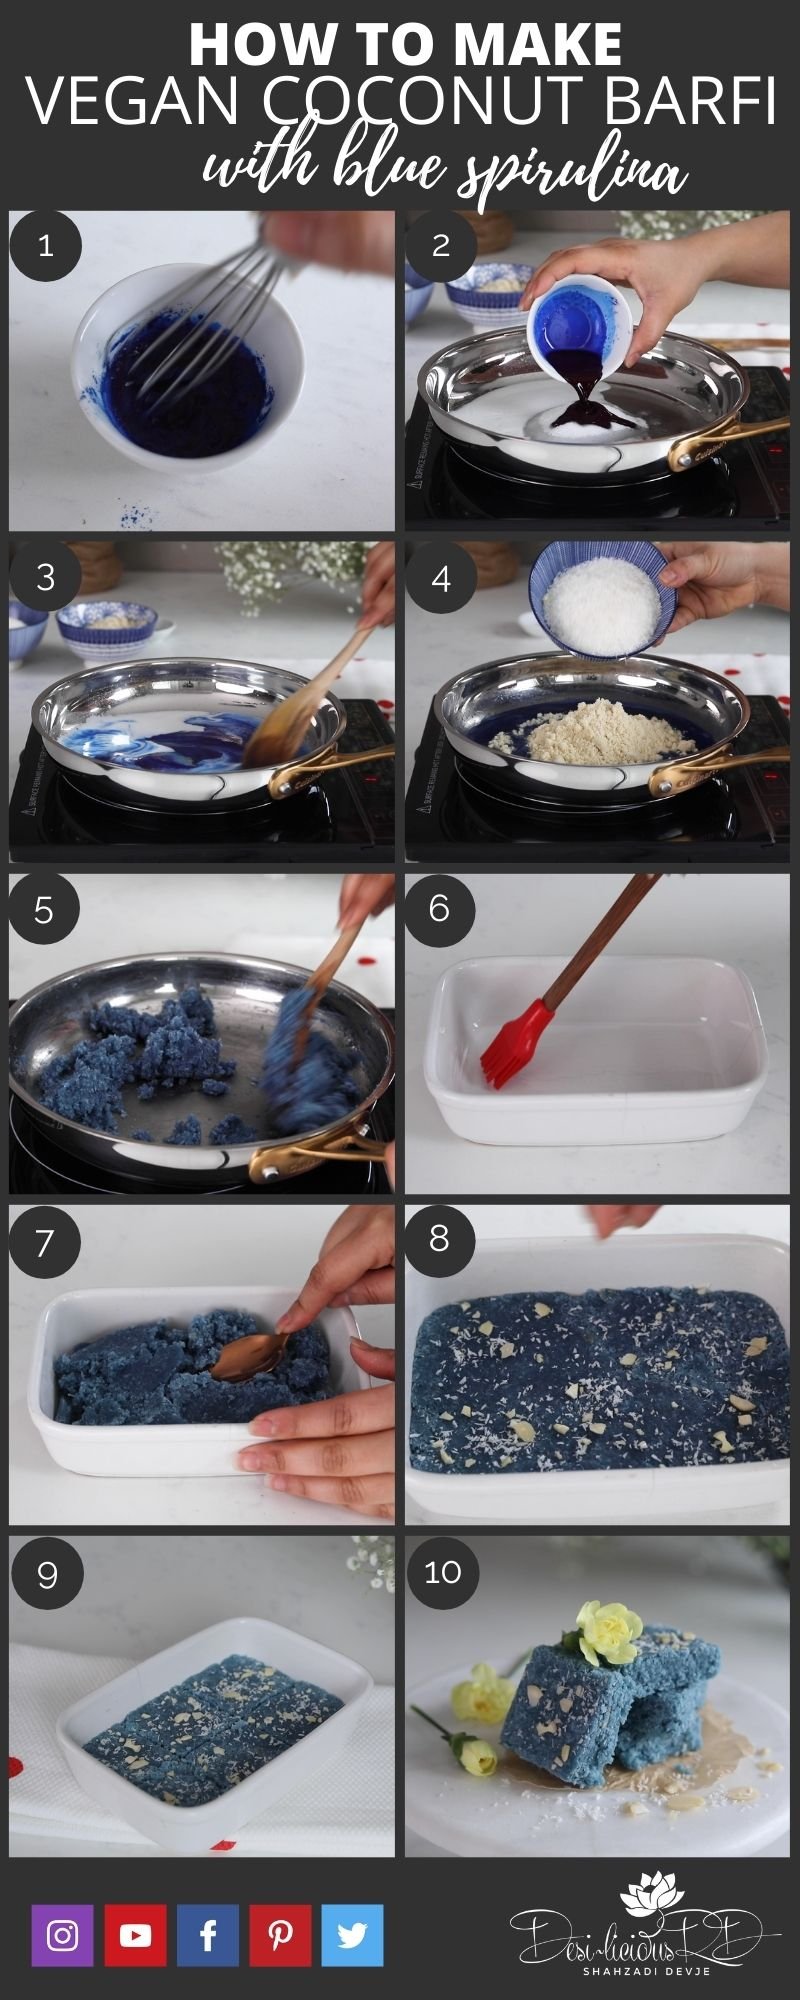 step by step preparation shots of how to make vegan coconut barfi with blue spirulina in a pan